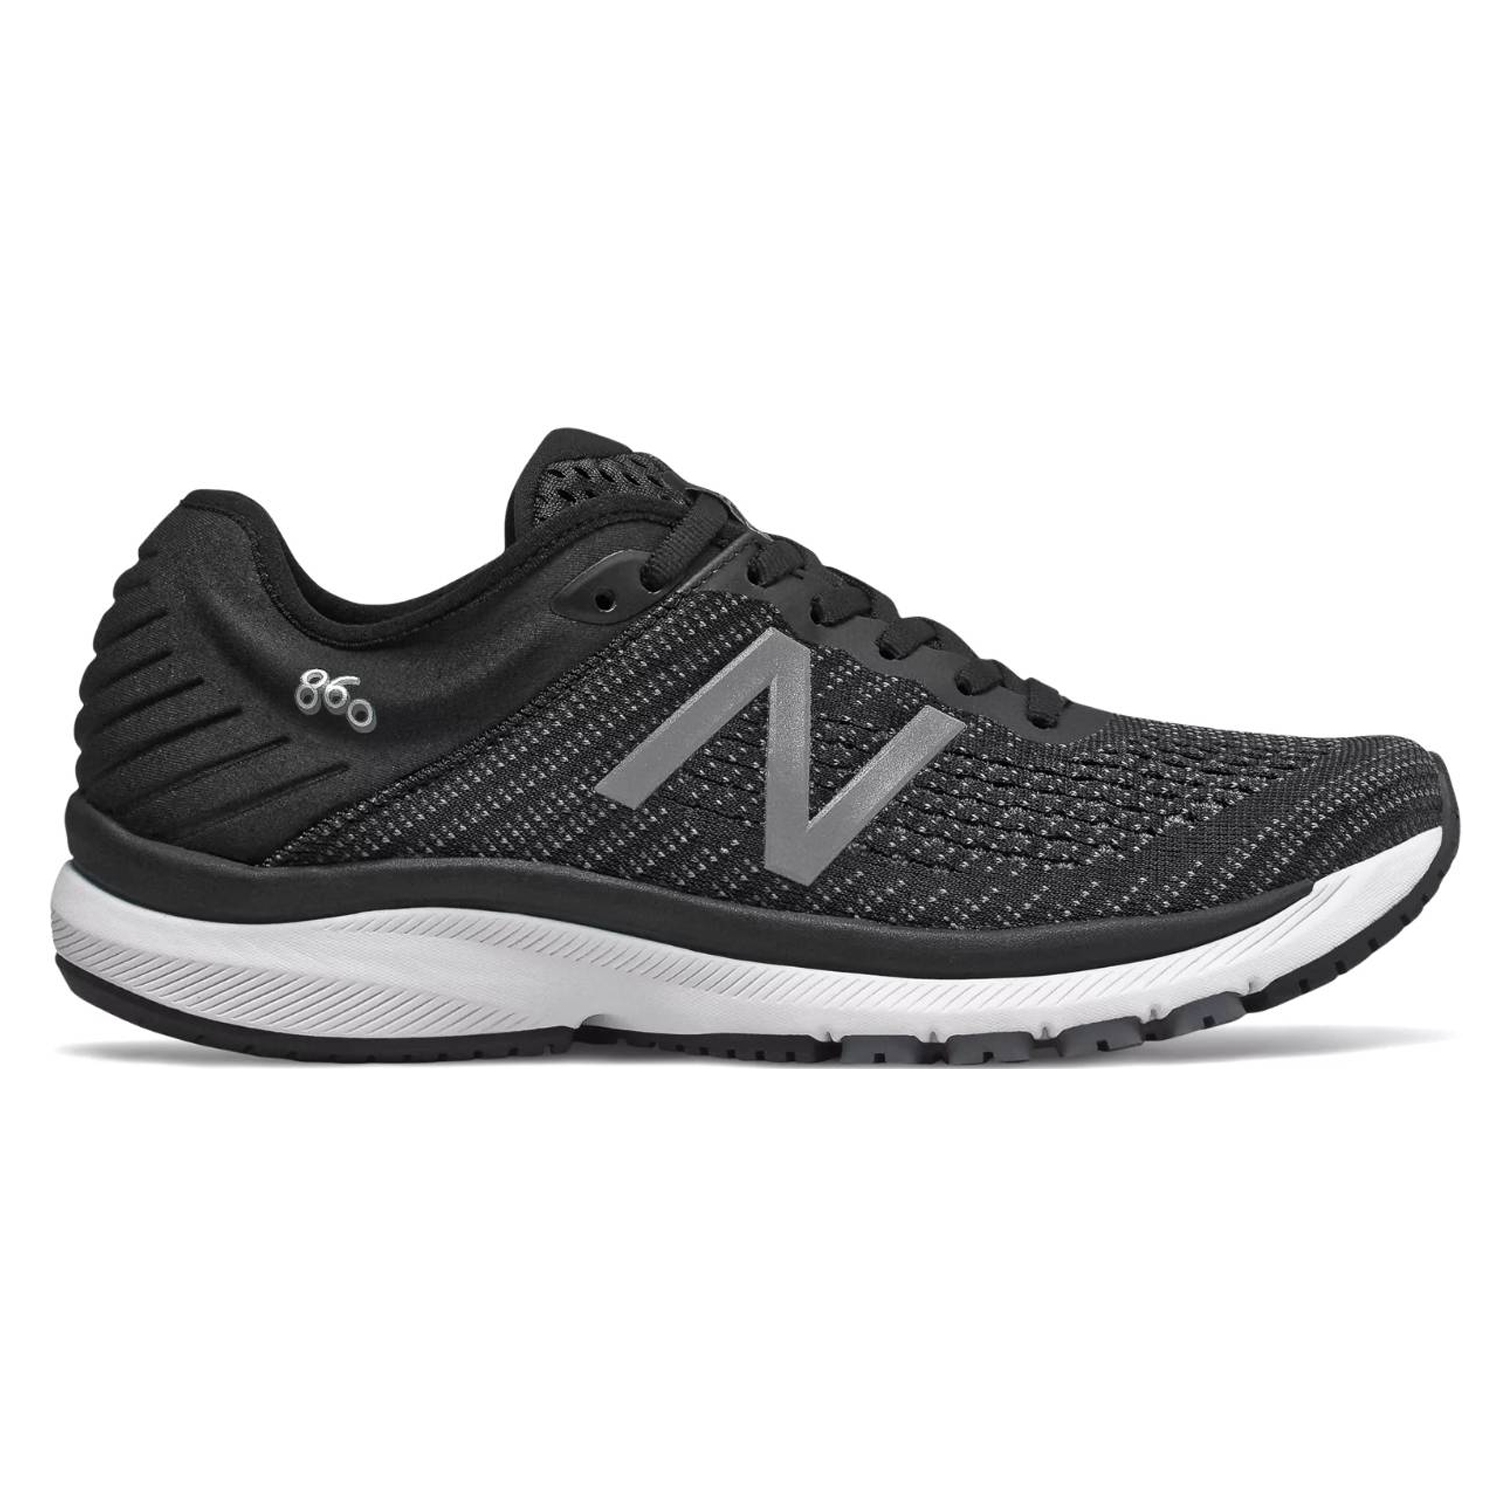 New Balance W860 v10 (D) Wide Womens Running Shoes: Black/White | Mike ...